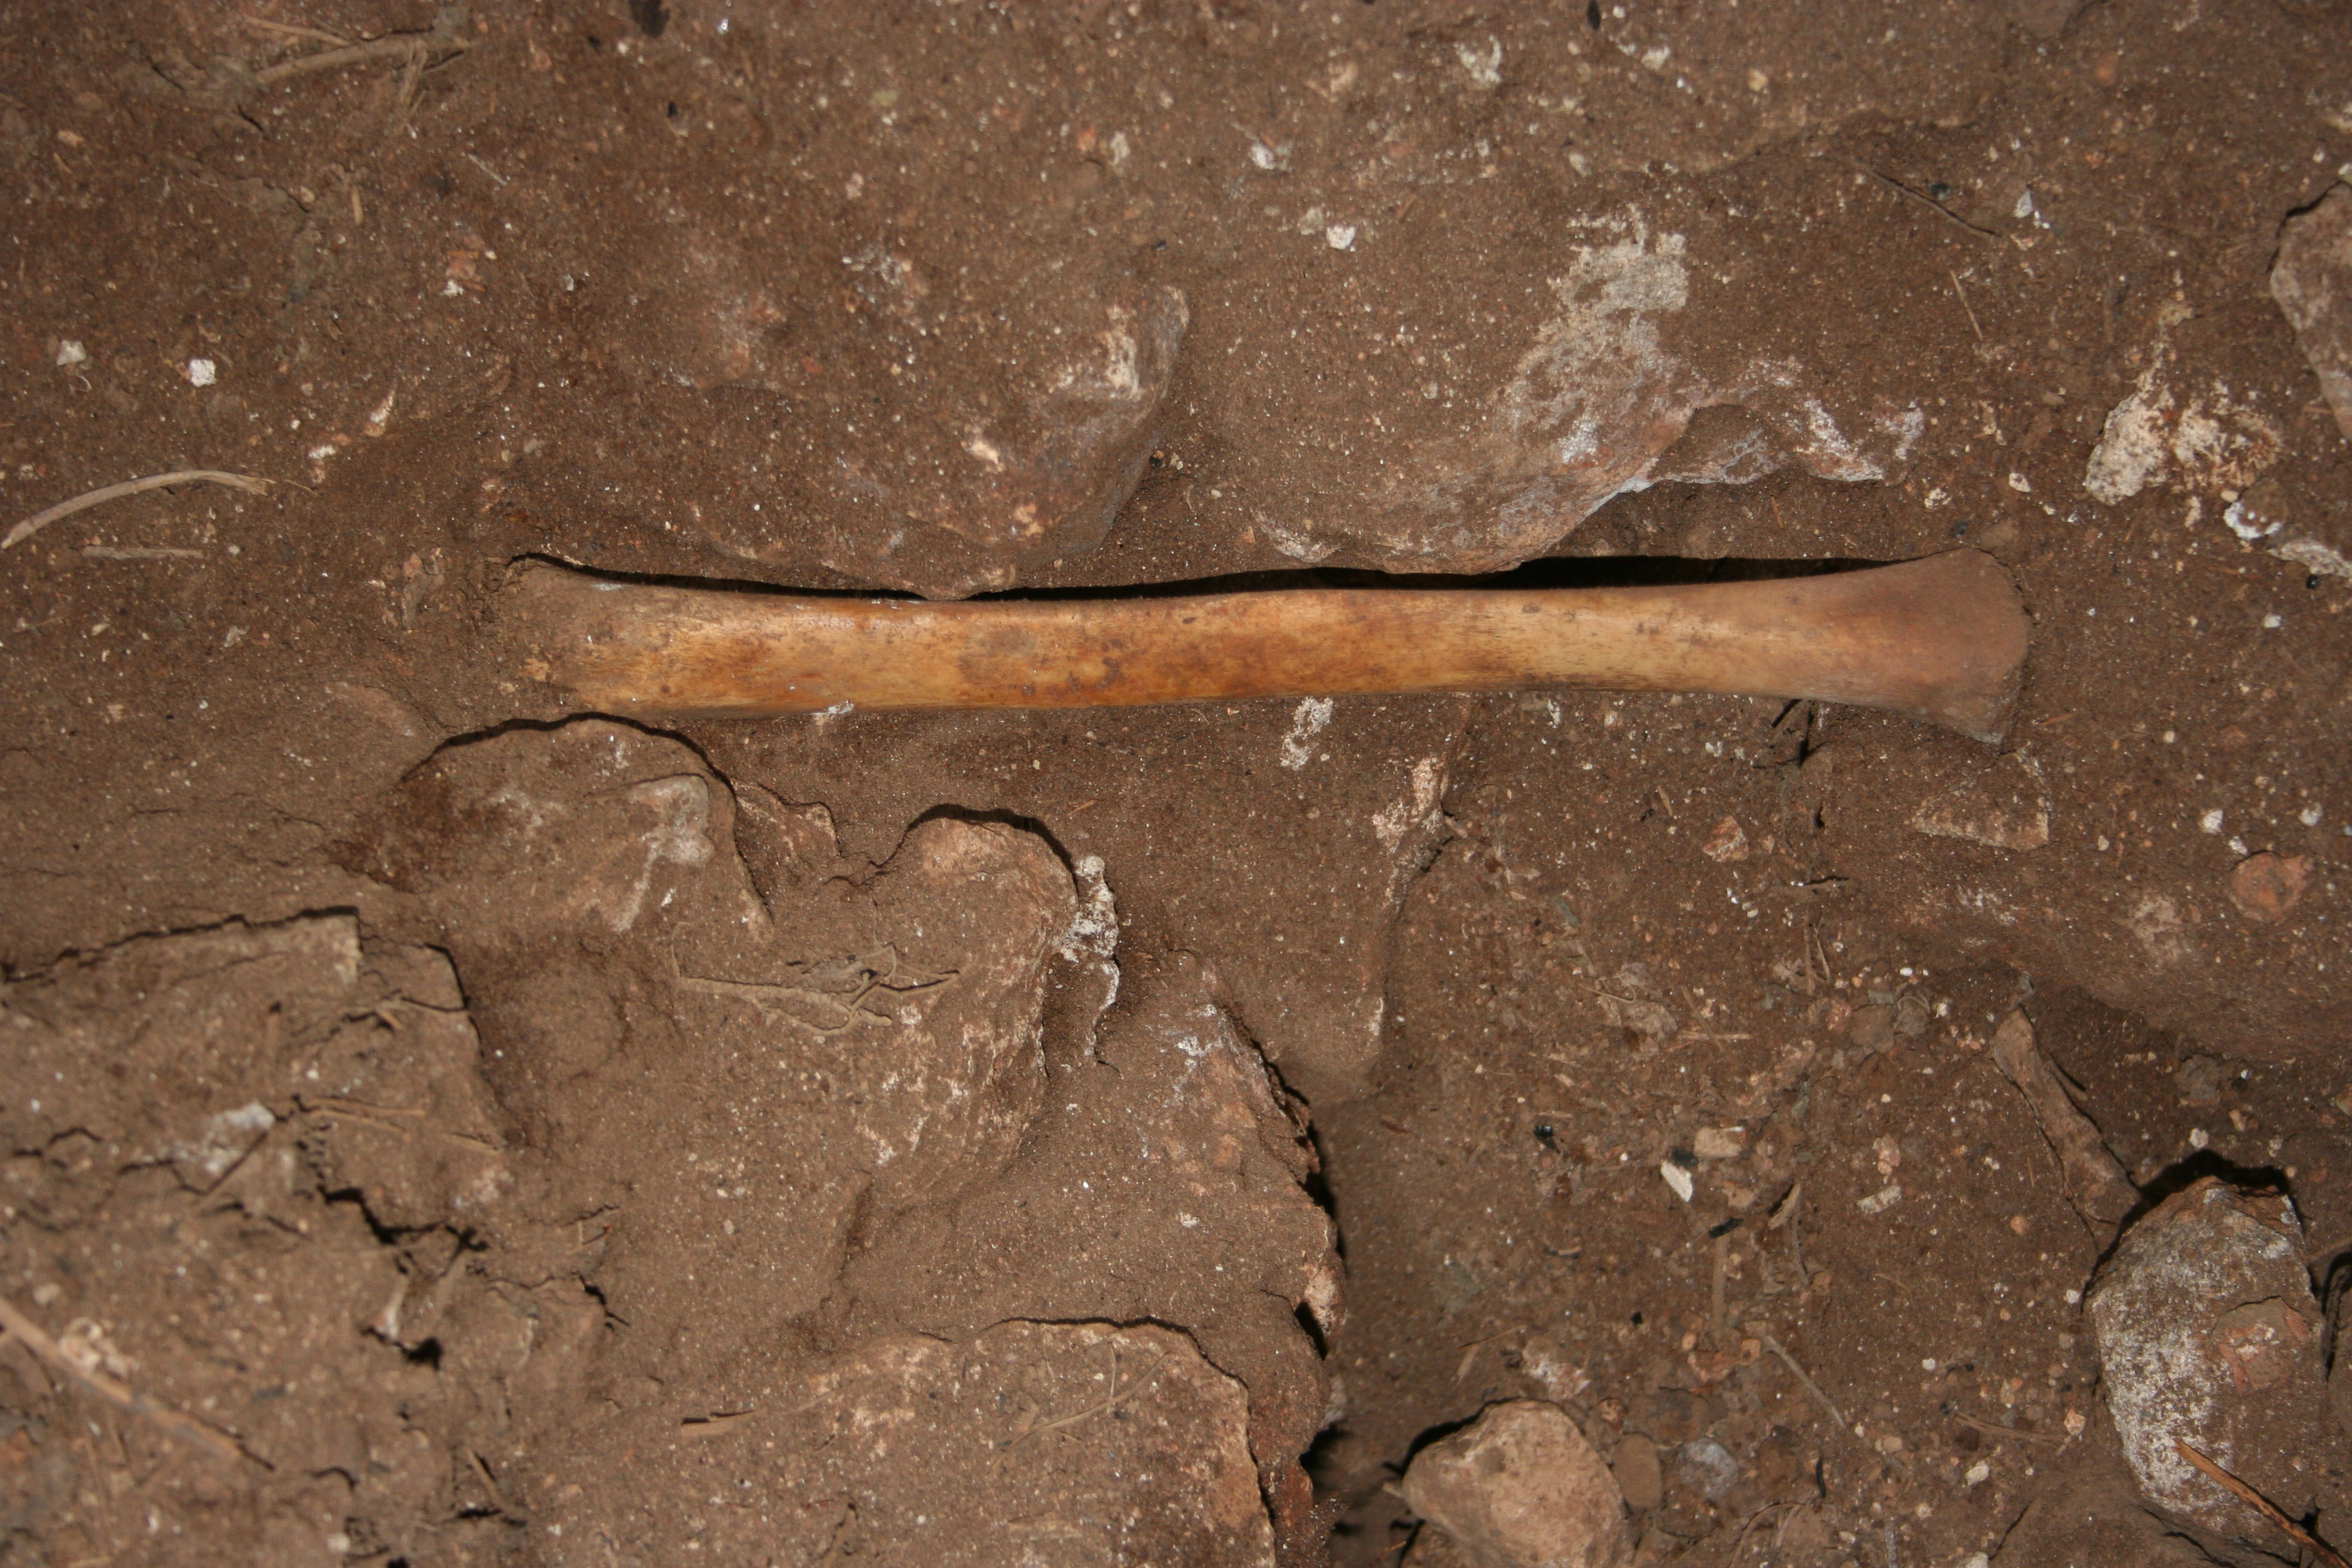 A human bone recovered from the cave. CREDIT: J.C. Vera RodrÃ­guez